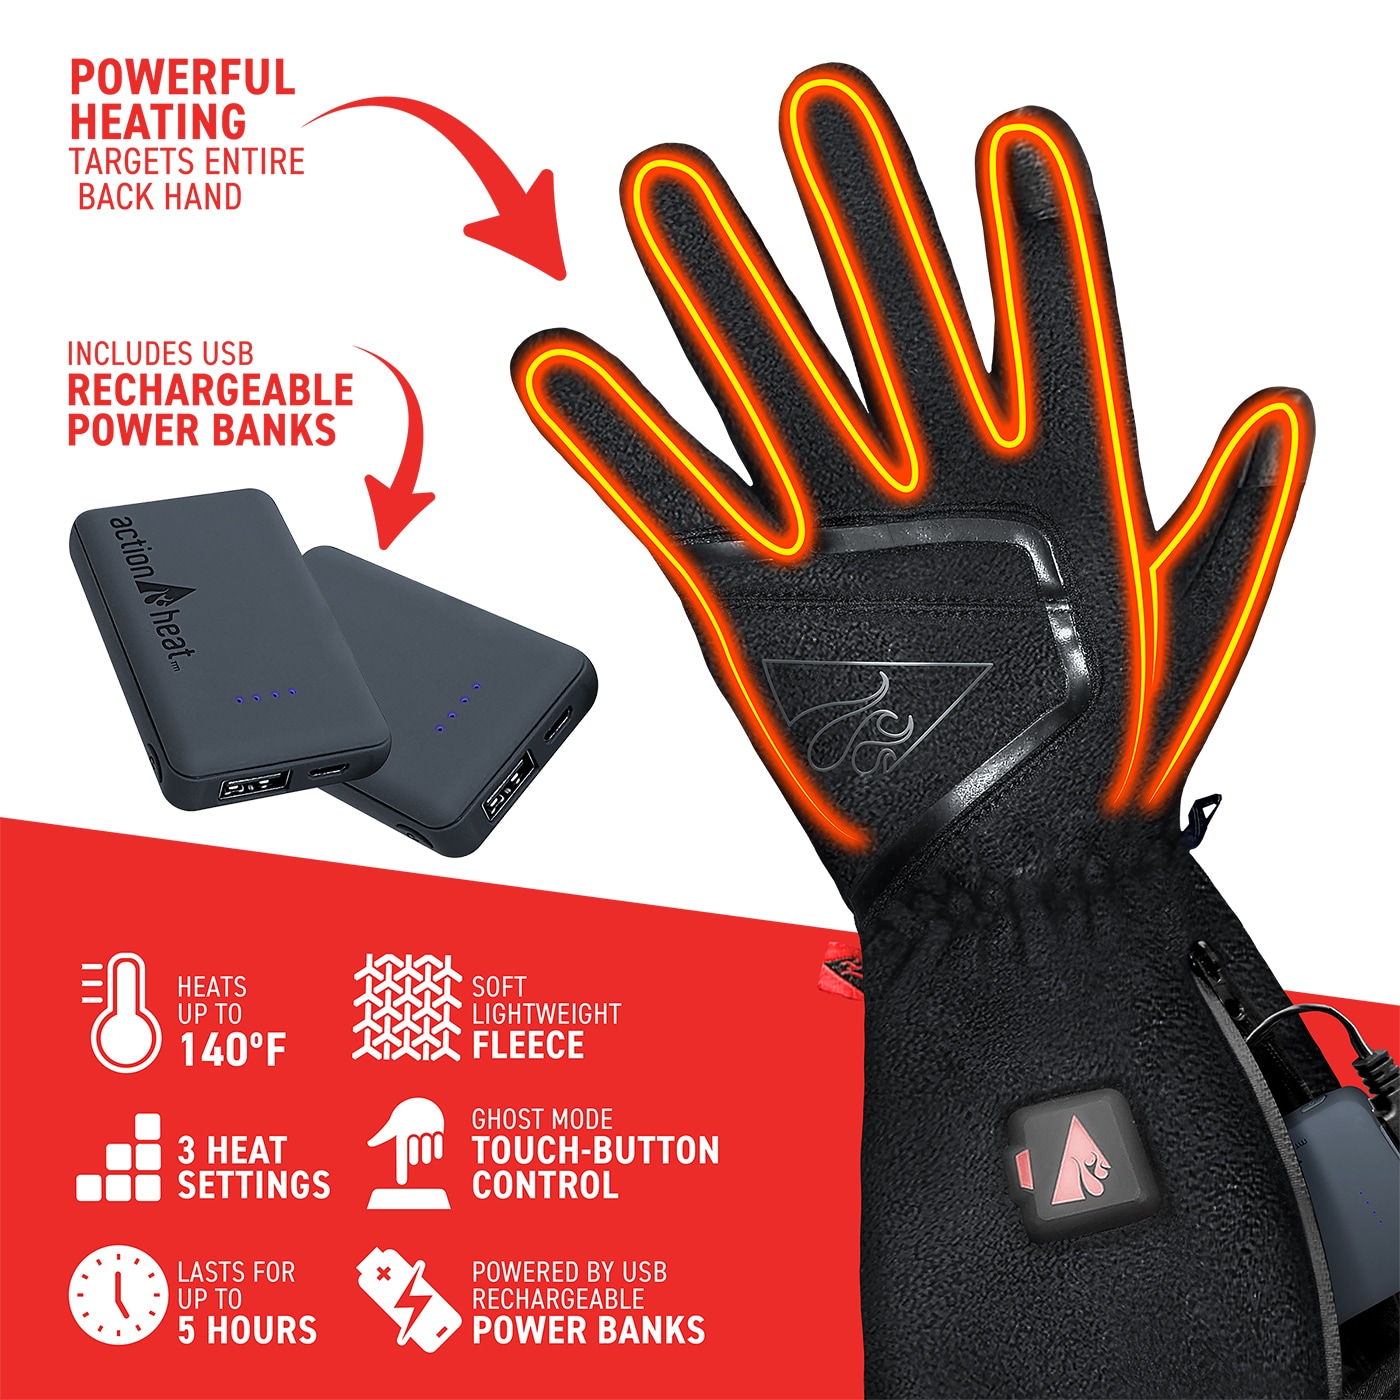 ActionHeat Women's 5V Battery Heated Glove Liners - Black